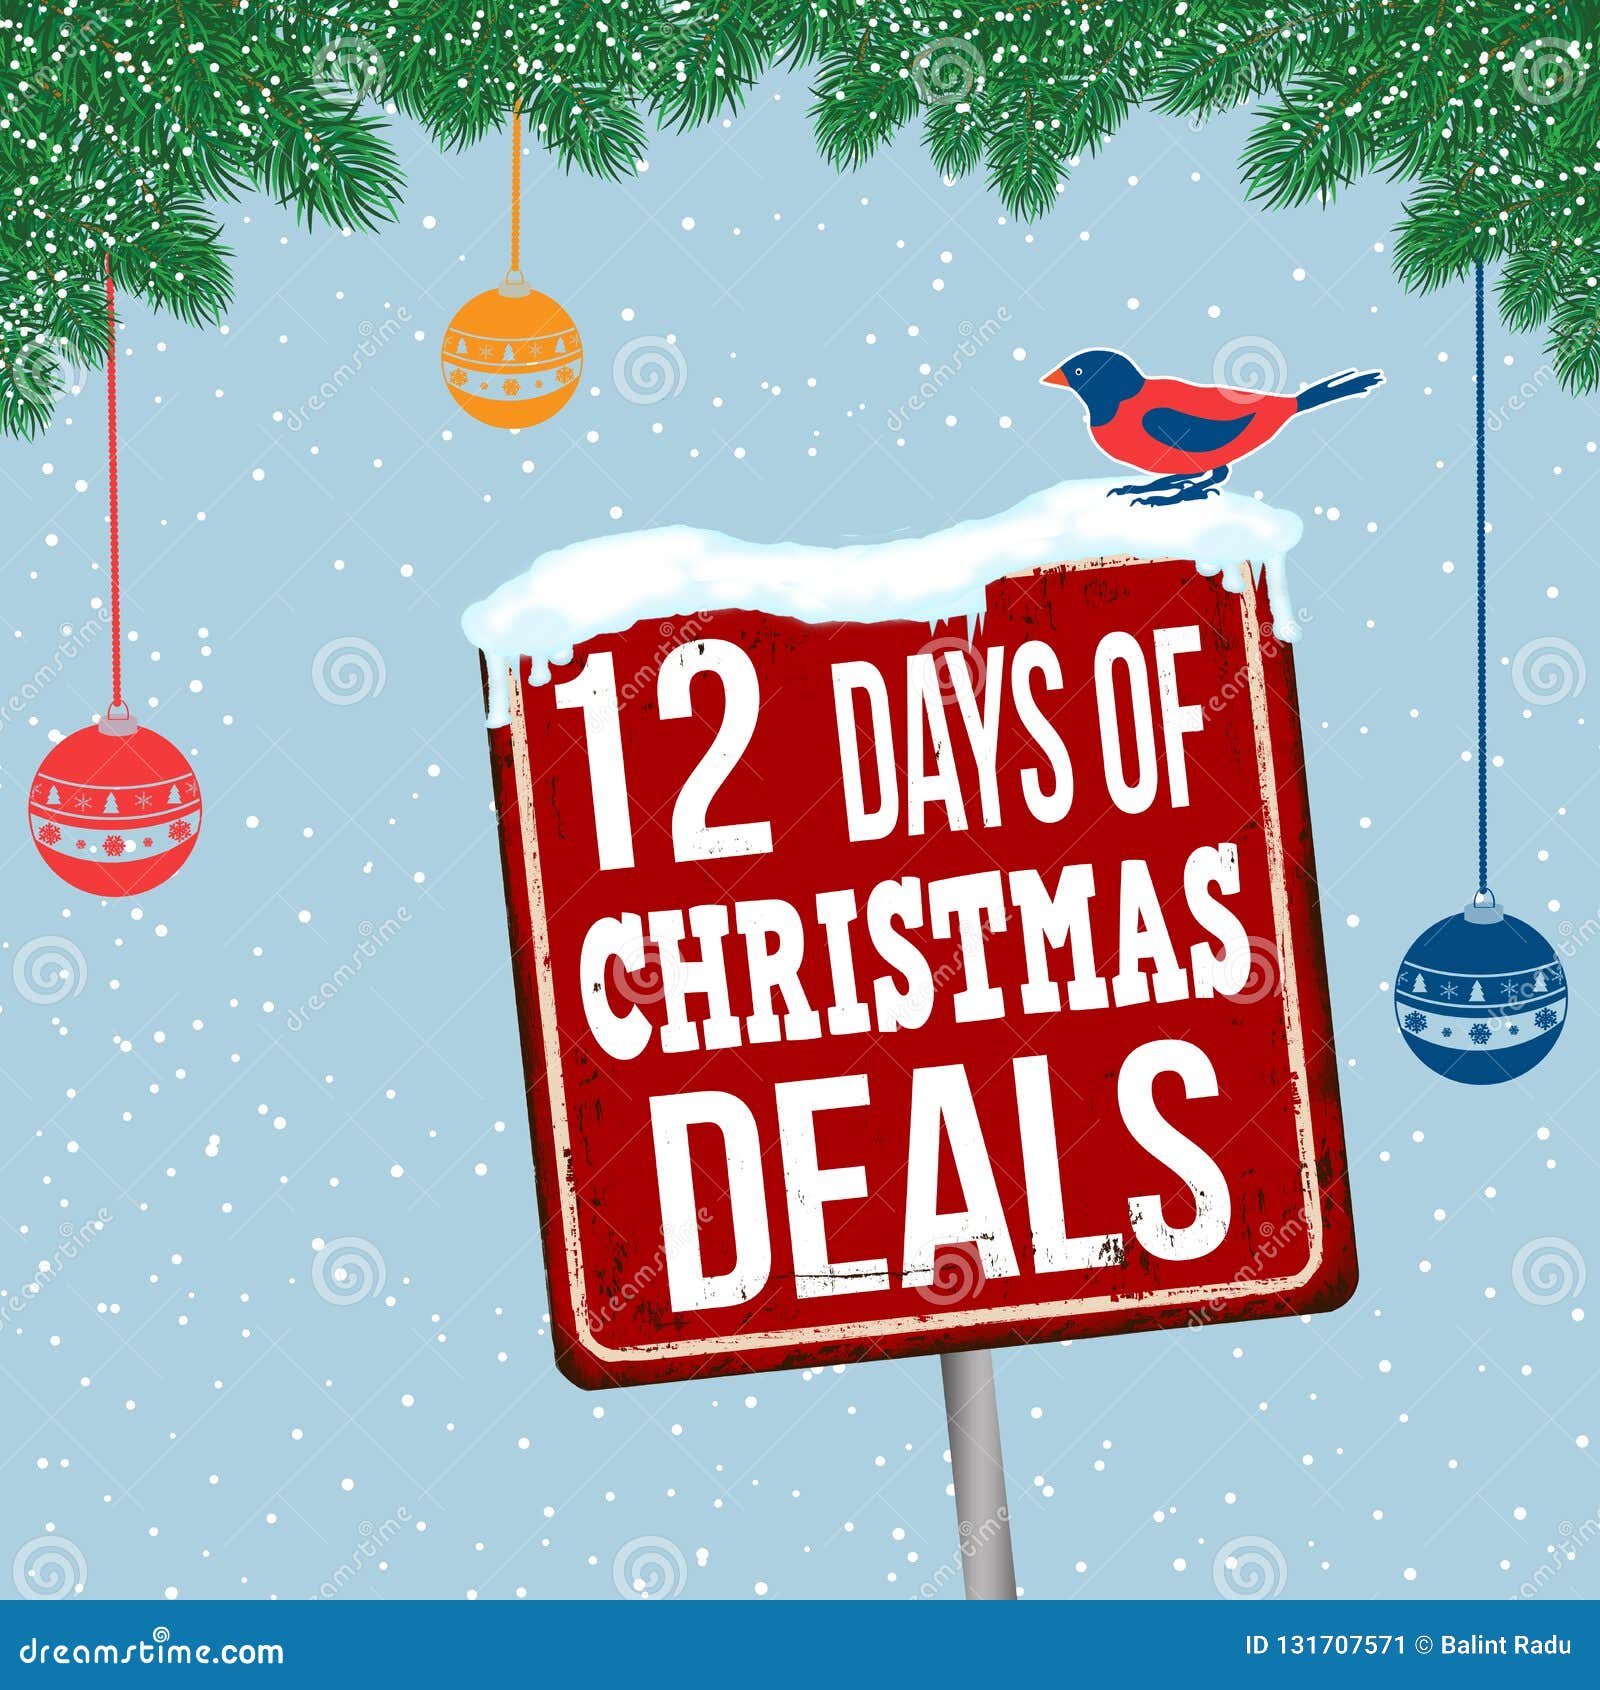 12 days of christmas deals vintage rusty metal sign